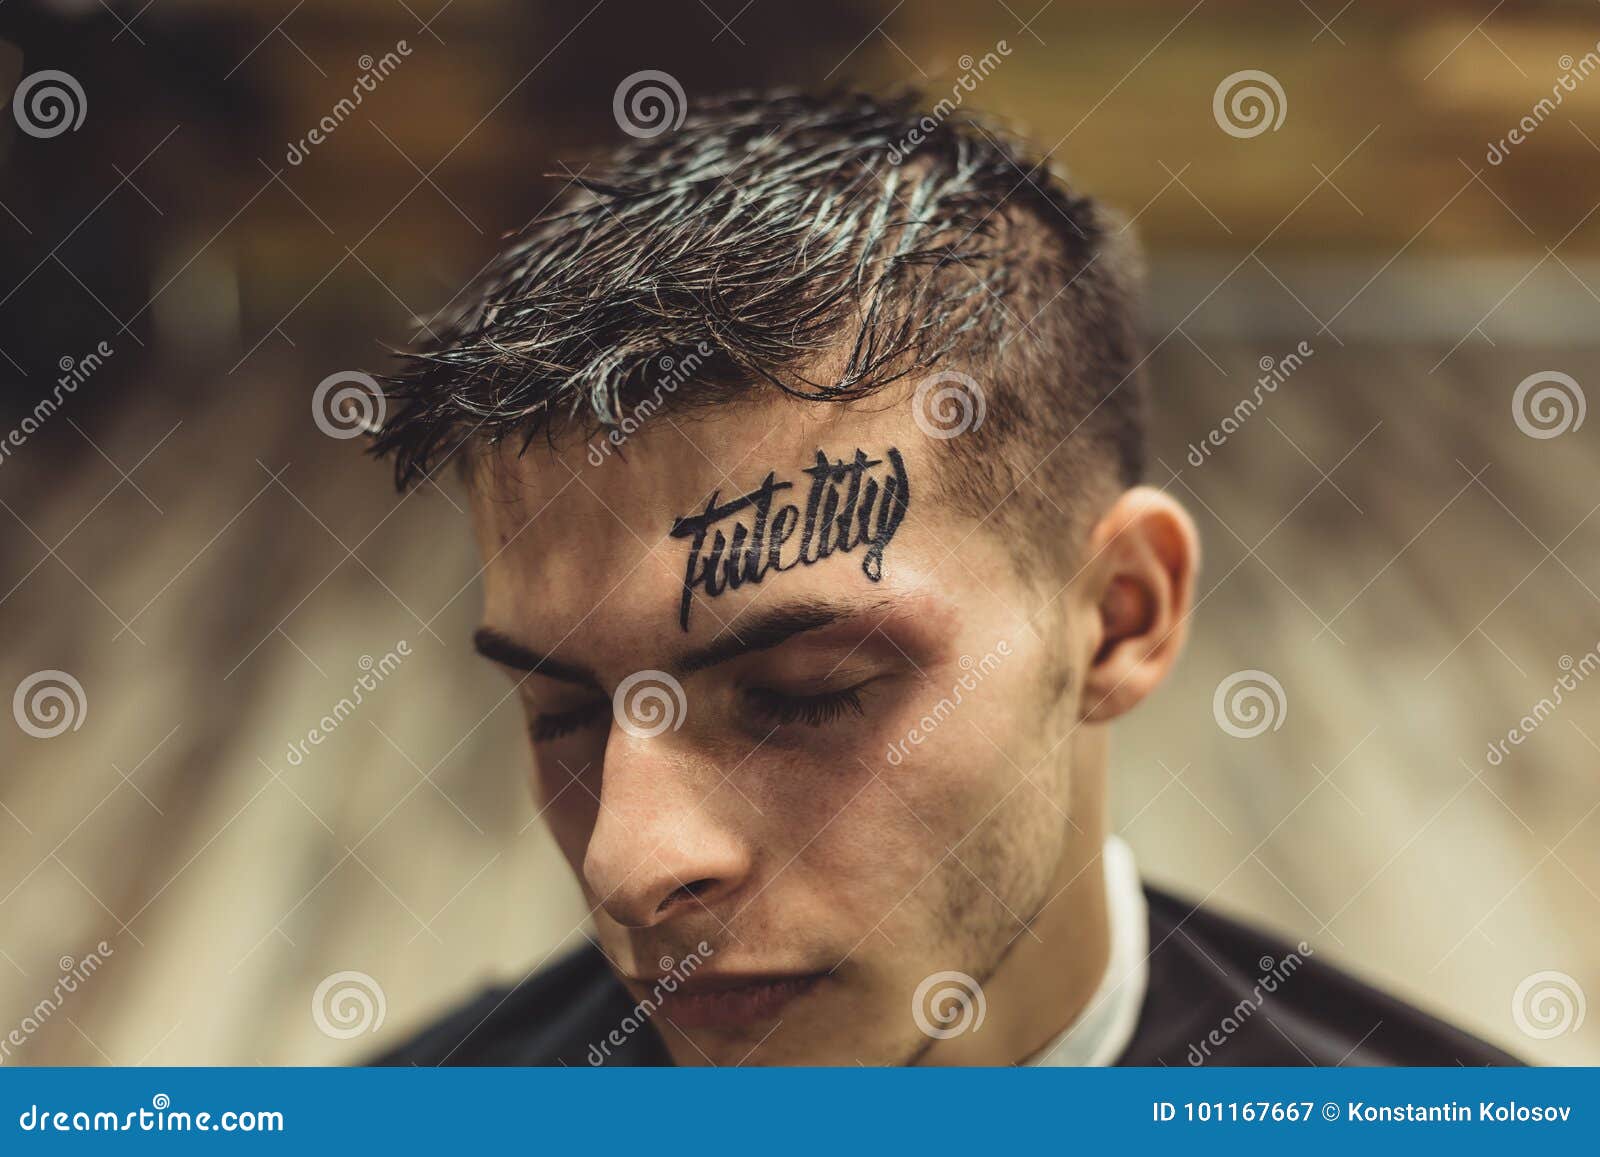 Portrait of Man with Tattoo Stock Image - Image of stylish, groomed:  101167667